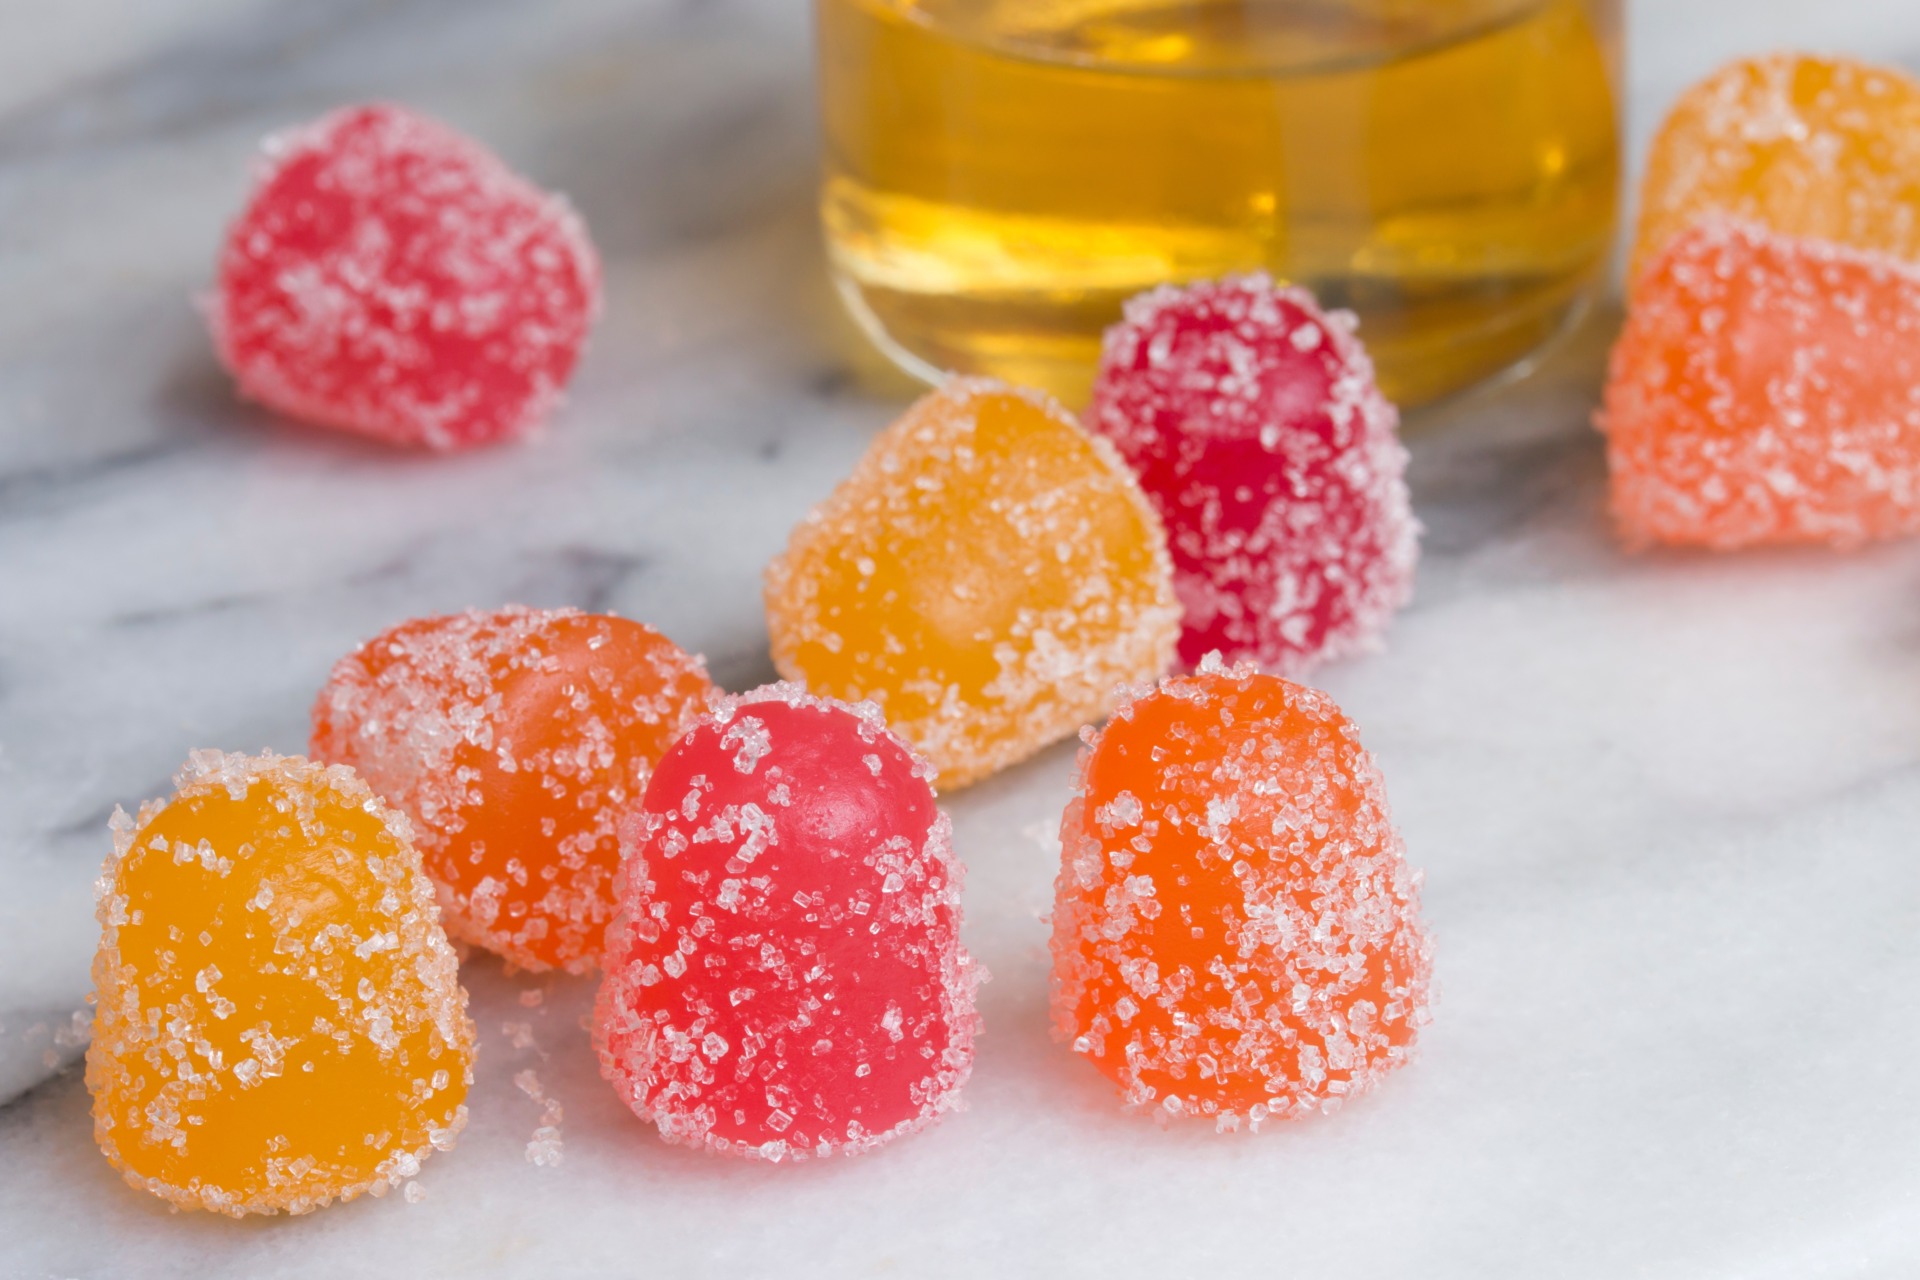 CBD gummies to introduce the benefits of edibles